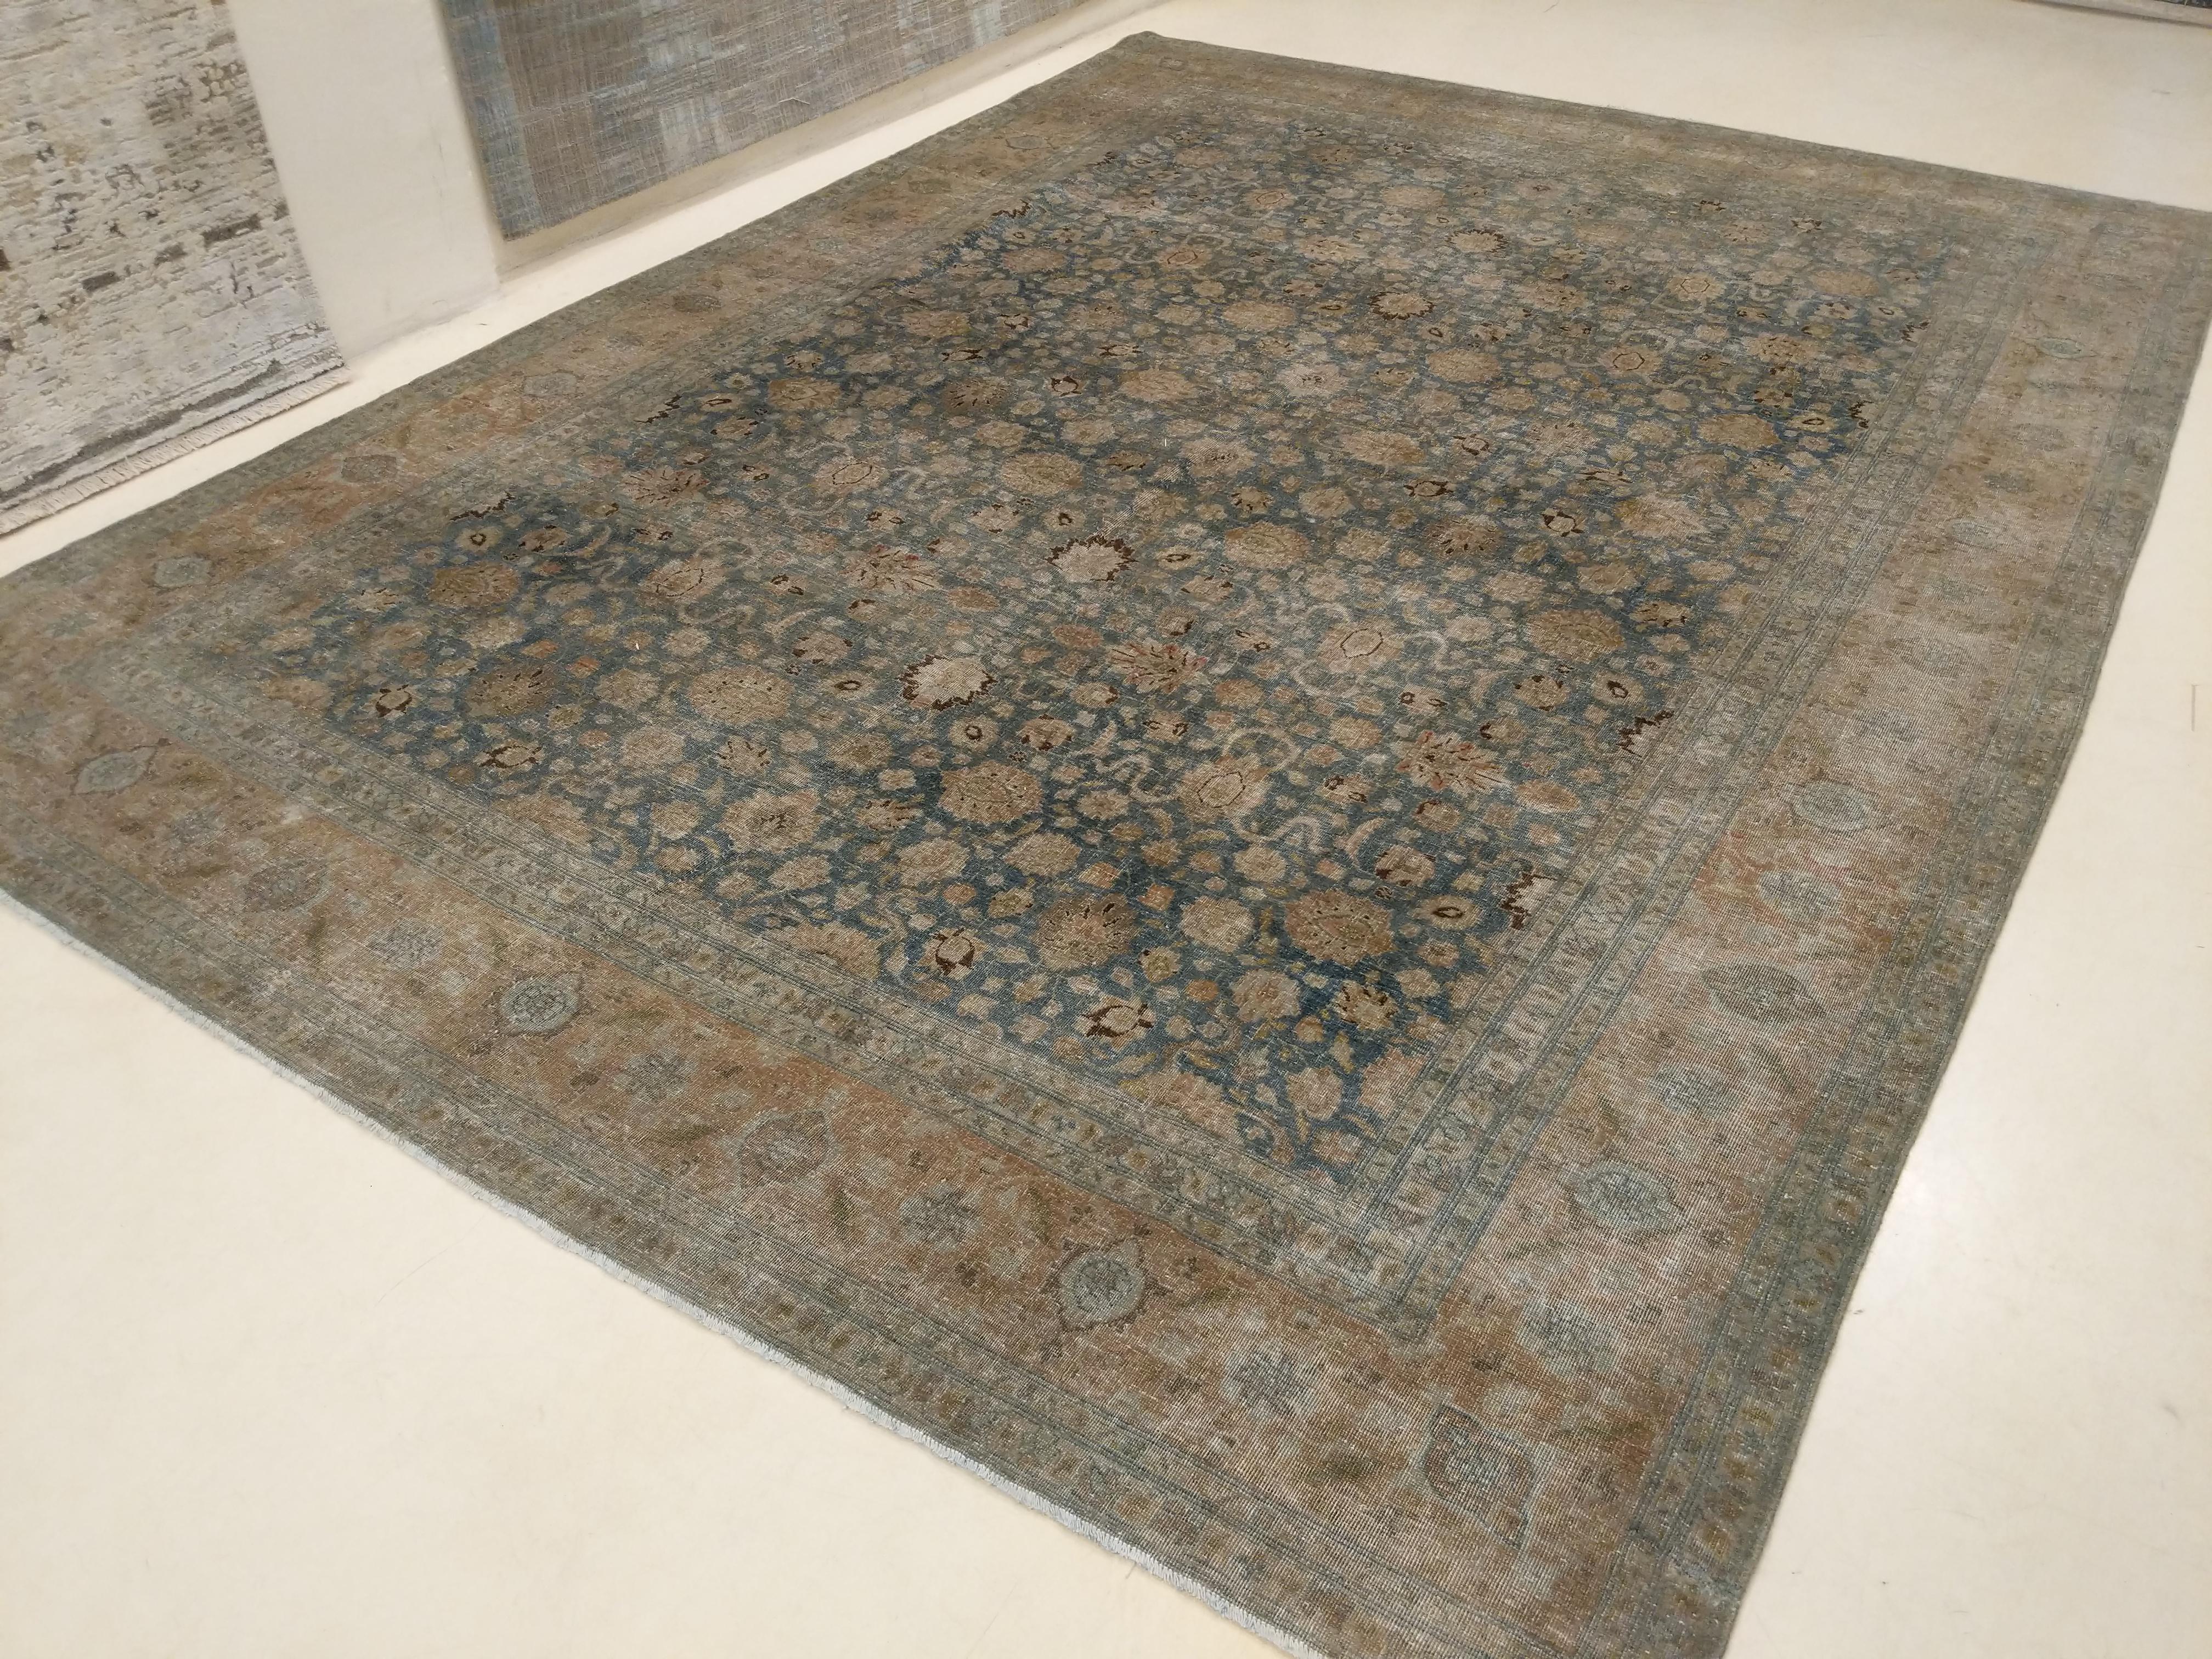 Hand-Knotted Large Fine Vintage Anatolian Soft Teal Shabby Chic All-Over Design Rug